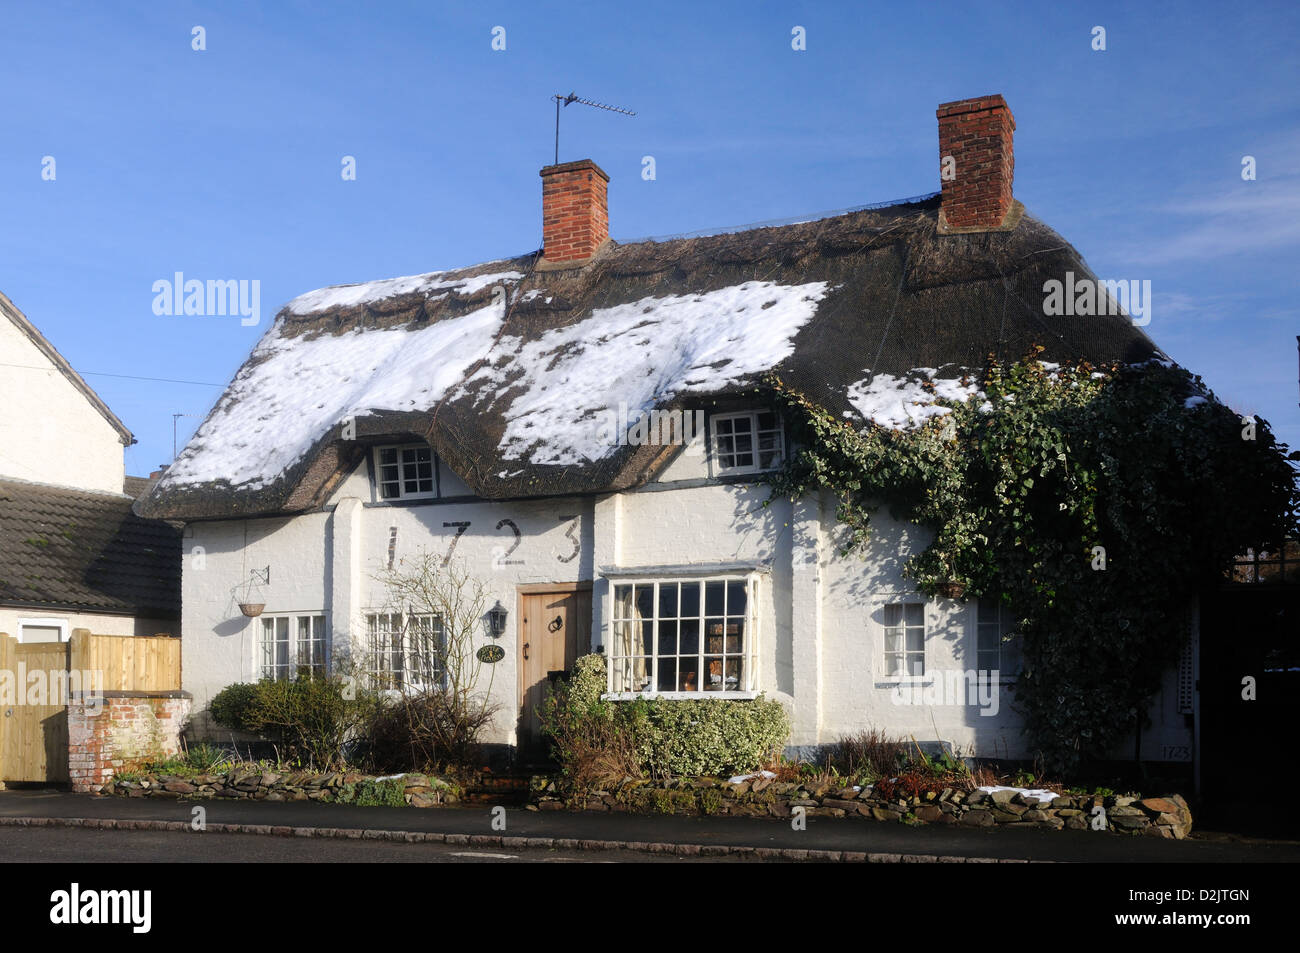 Anfang 18. c. Reetdachhaus, genannt 'LittleThatch', in Thrussington, Leicestershire, England Stockfoto